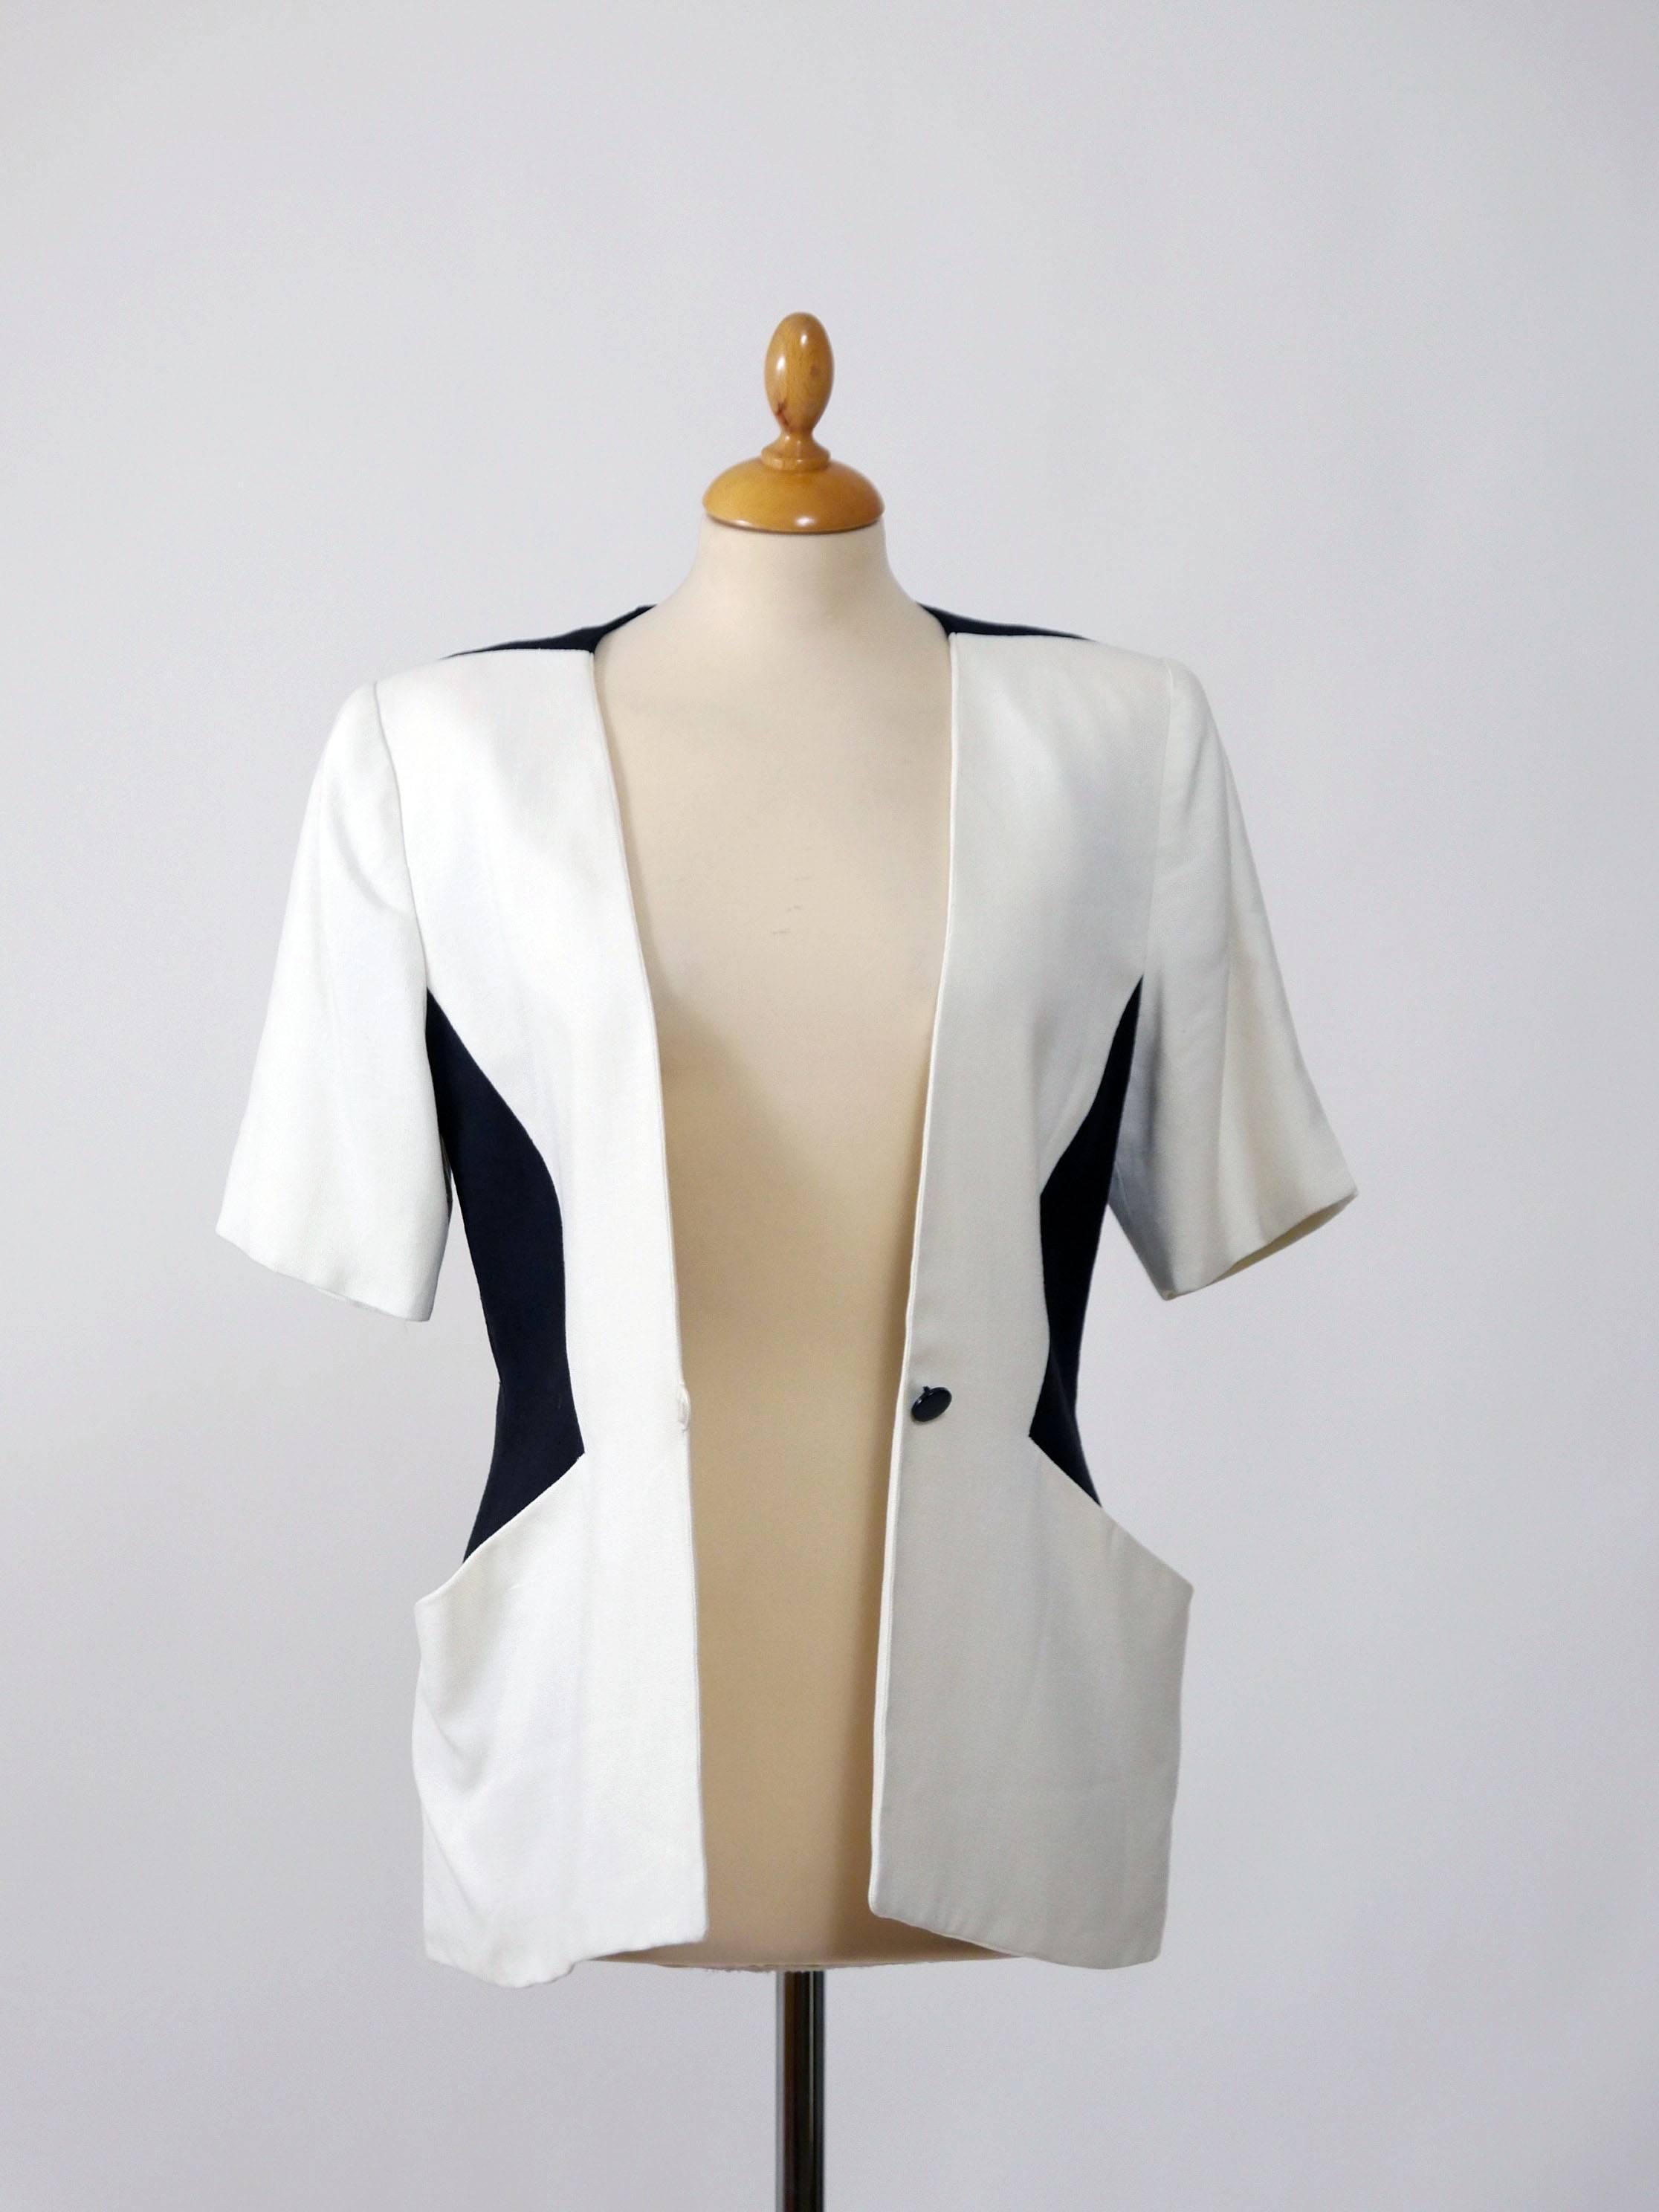 This gorgeous Nina Ricci jacket is in a black and white viscose fabric and has typical 80s signature body. It has short sleeves, padded shoulder, one button closure and frontal pockets. It's fully lined. 

Very good vintage condition

Label: